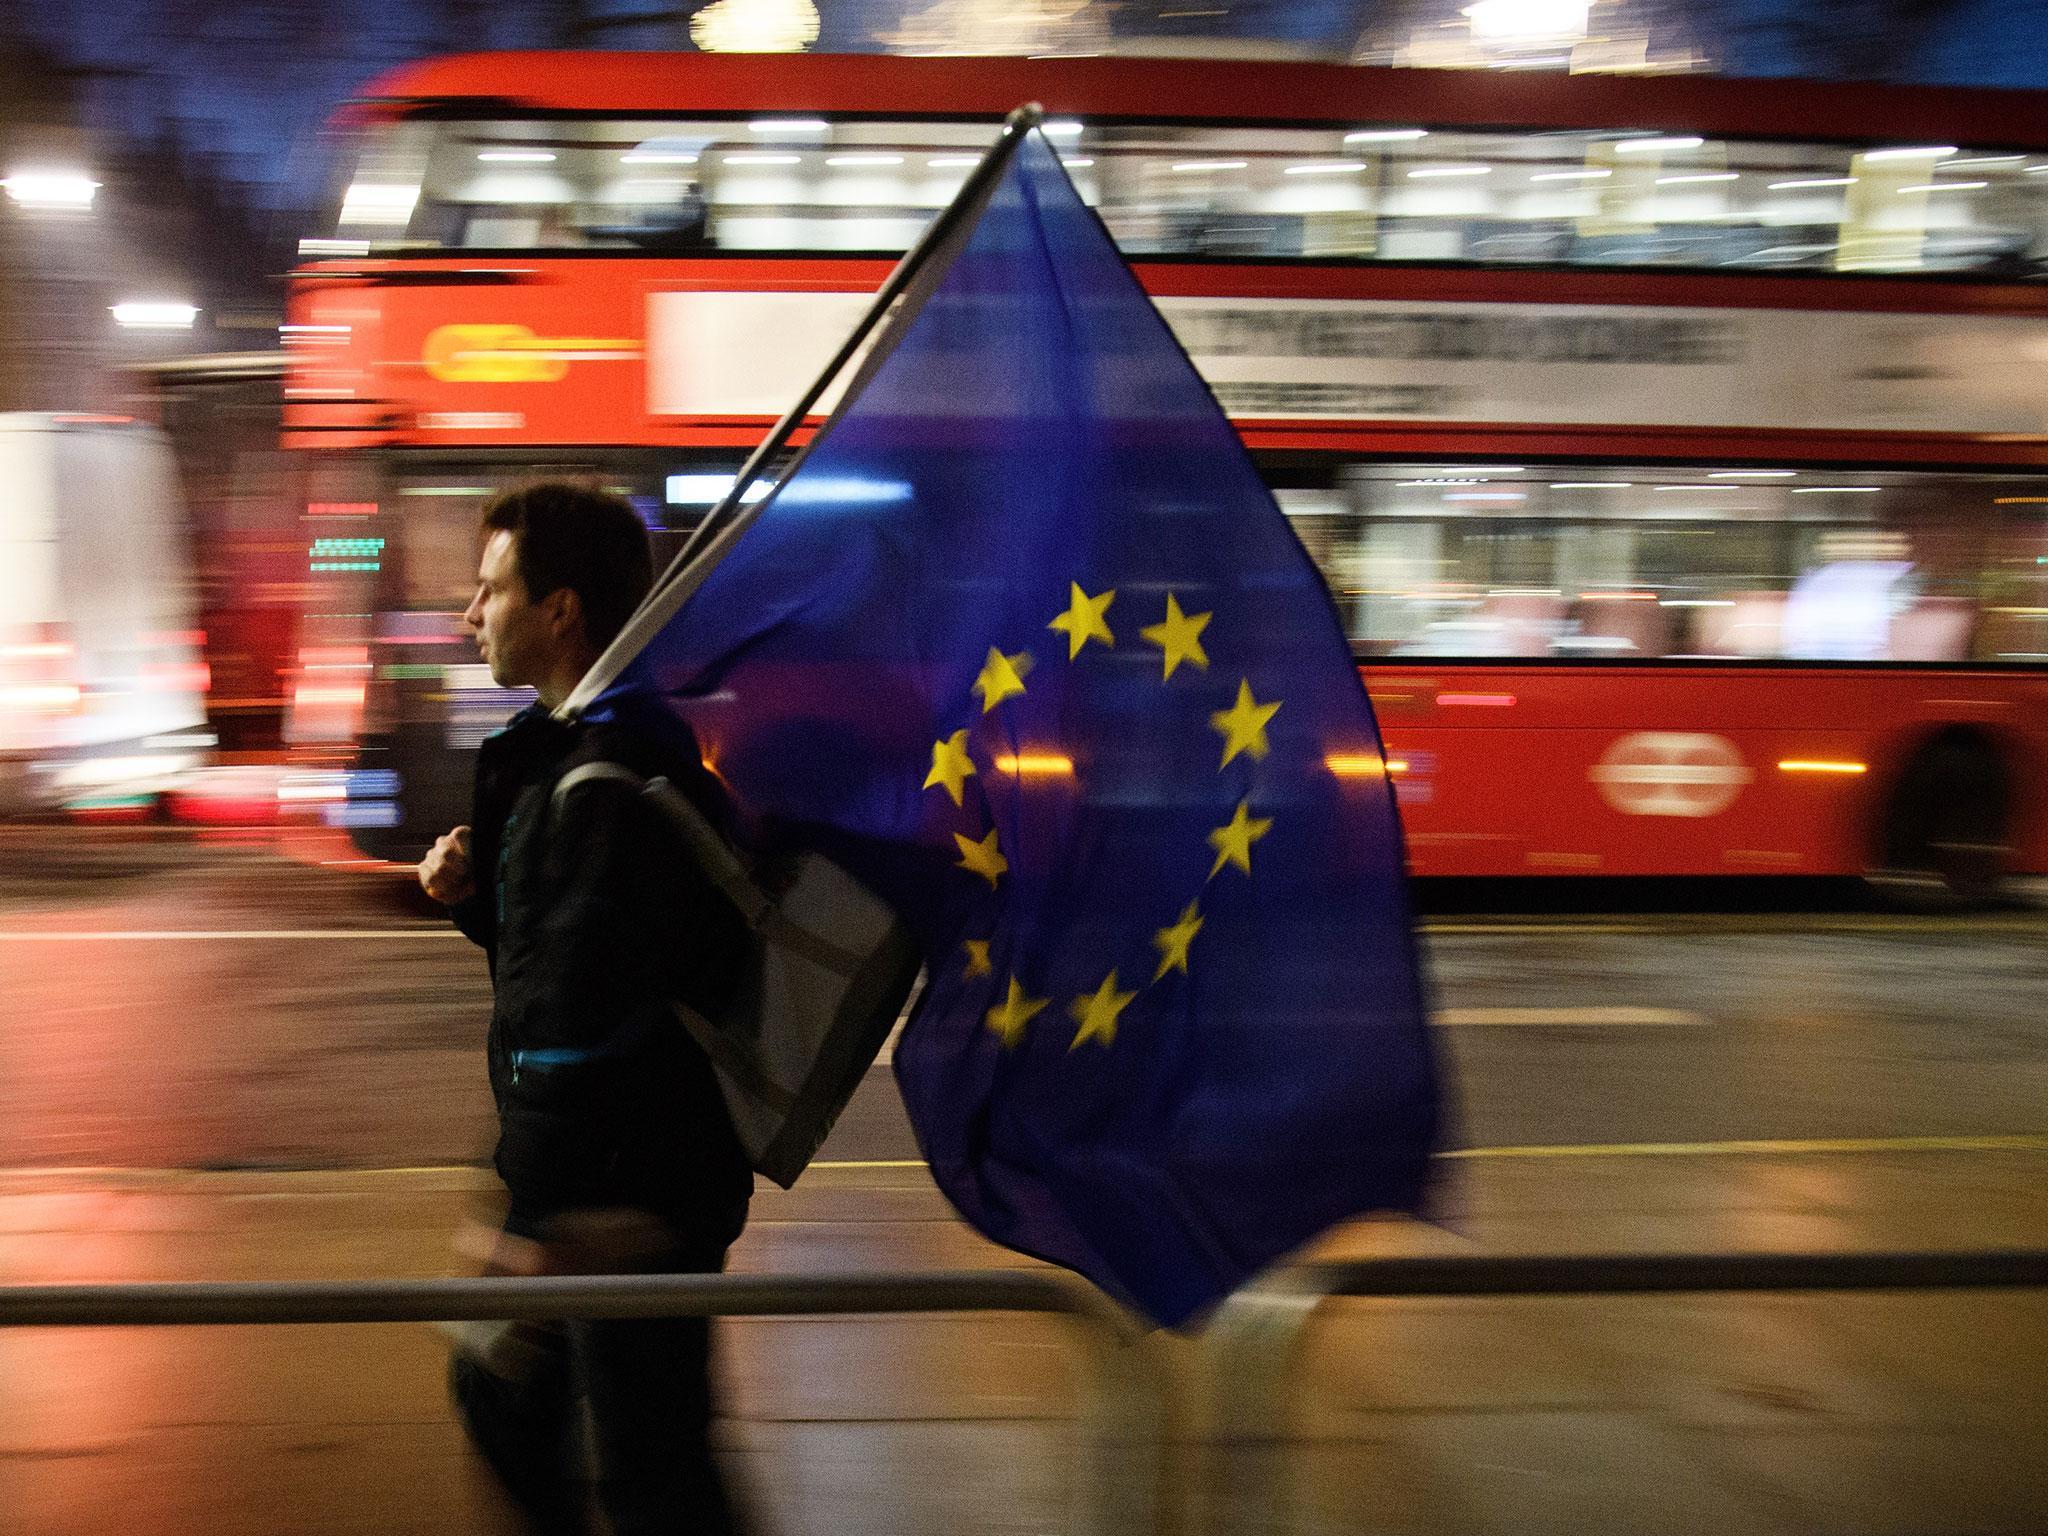 Article 50 will be triggered this month, starting the formal negotiations for Britain to leave the EU